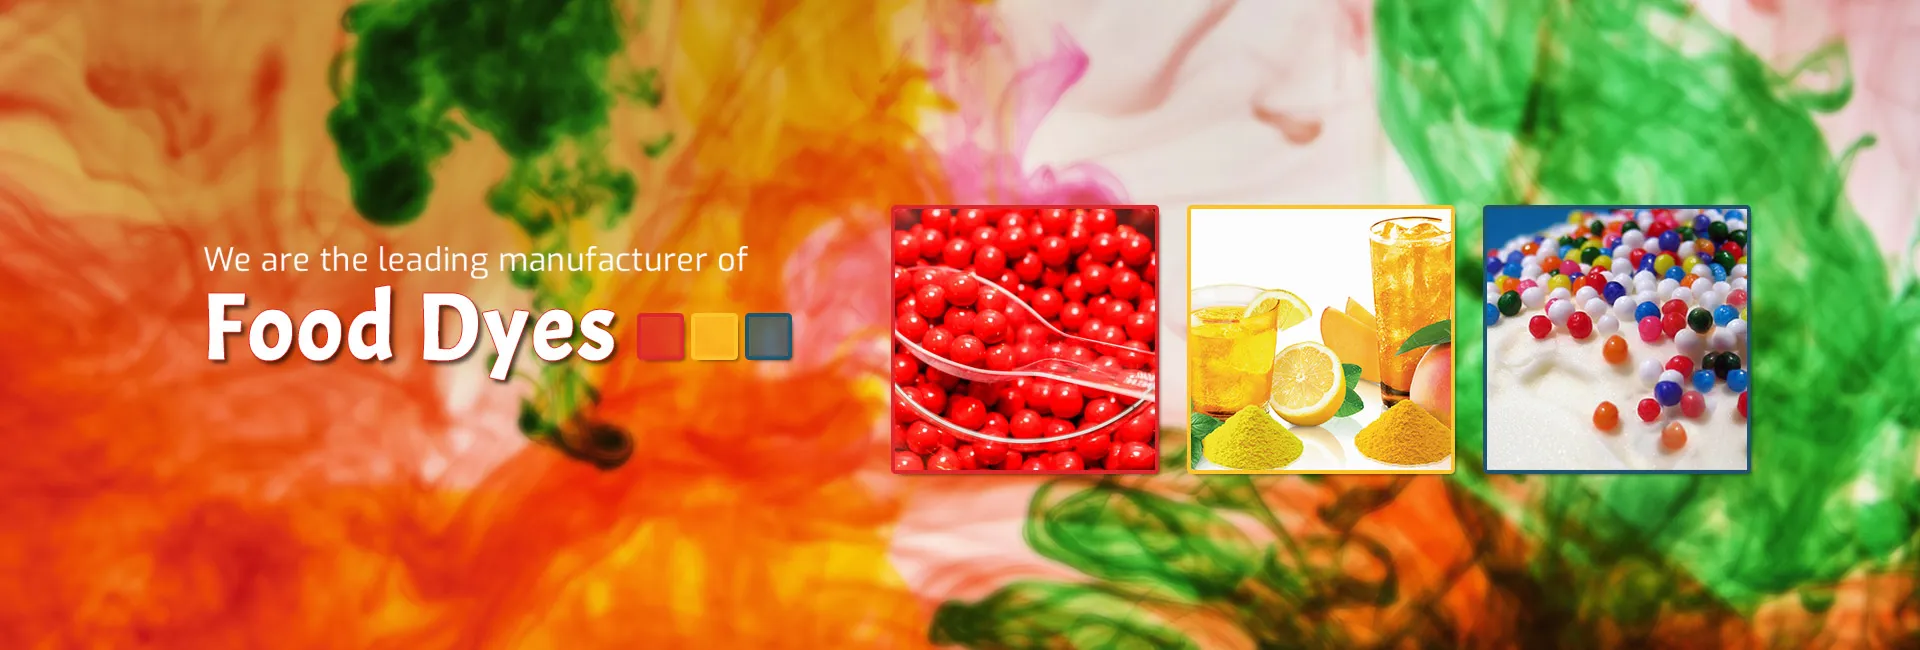 Food Dyes Manufacturer & Suppliers in Korea